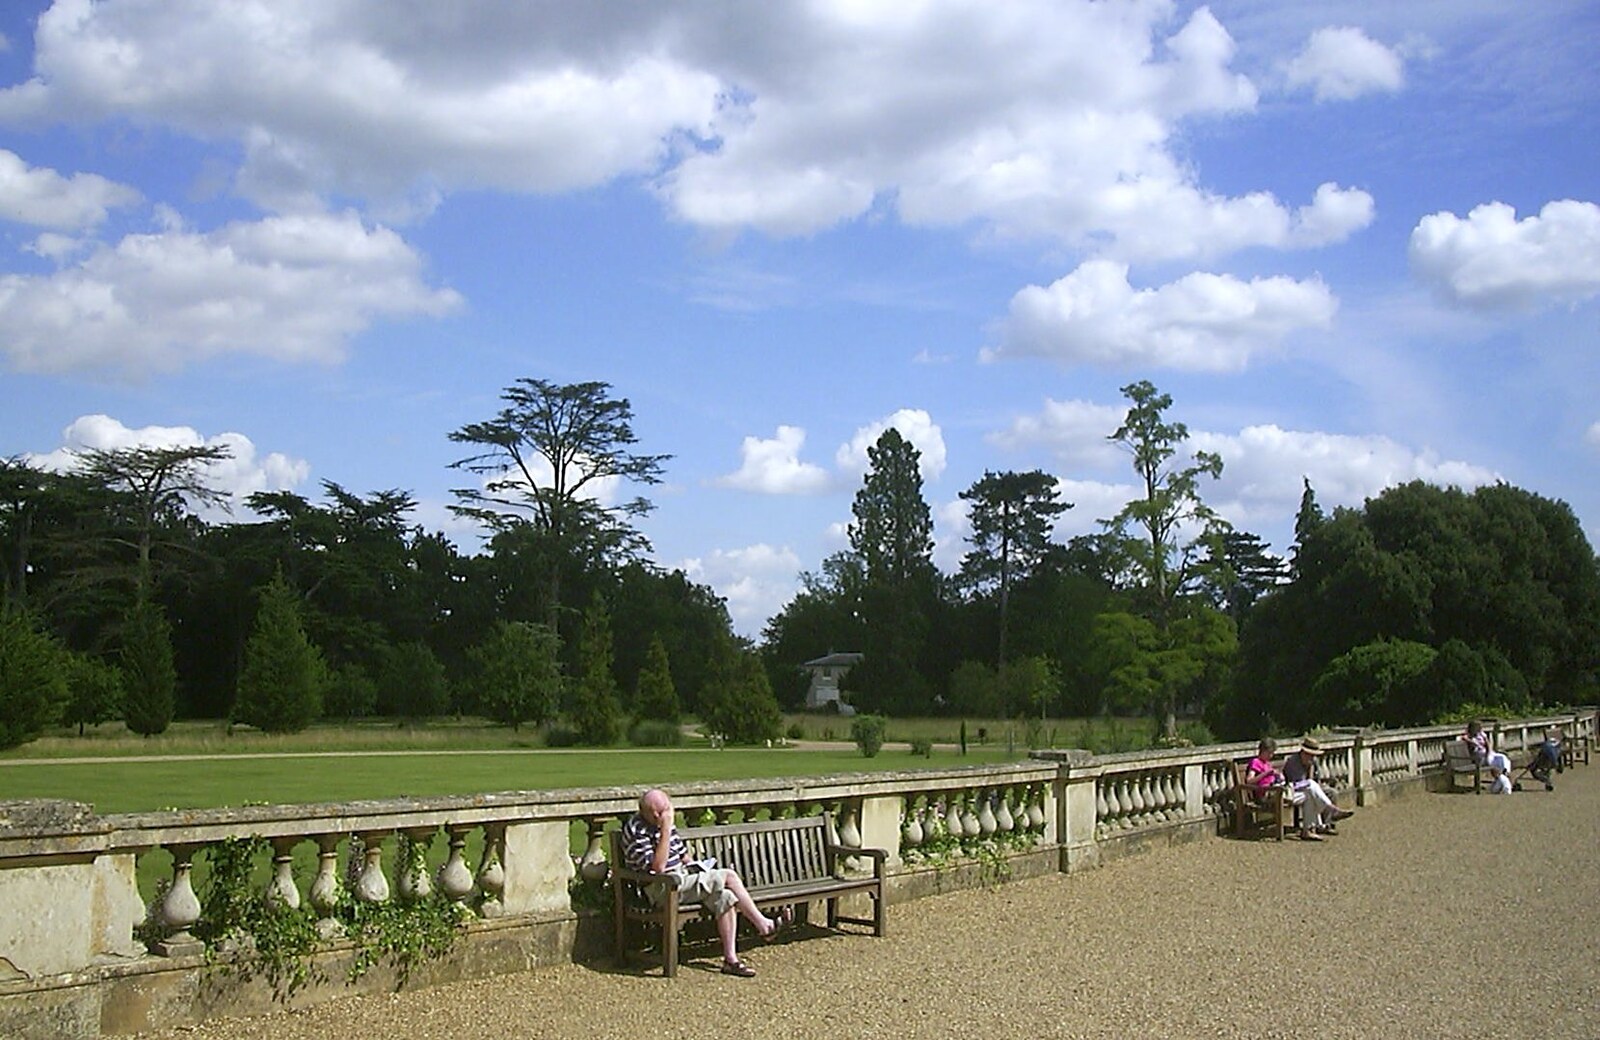 Sitting on benches from A Trip to Ickworth House, Horringer, Suffolk - 22nd August 2004